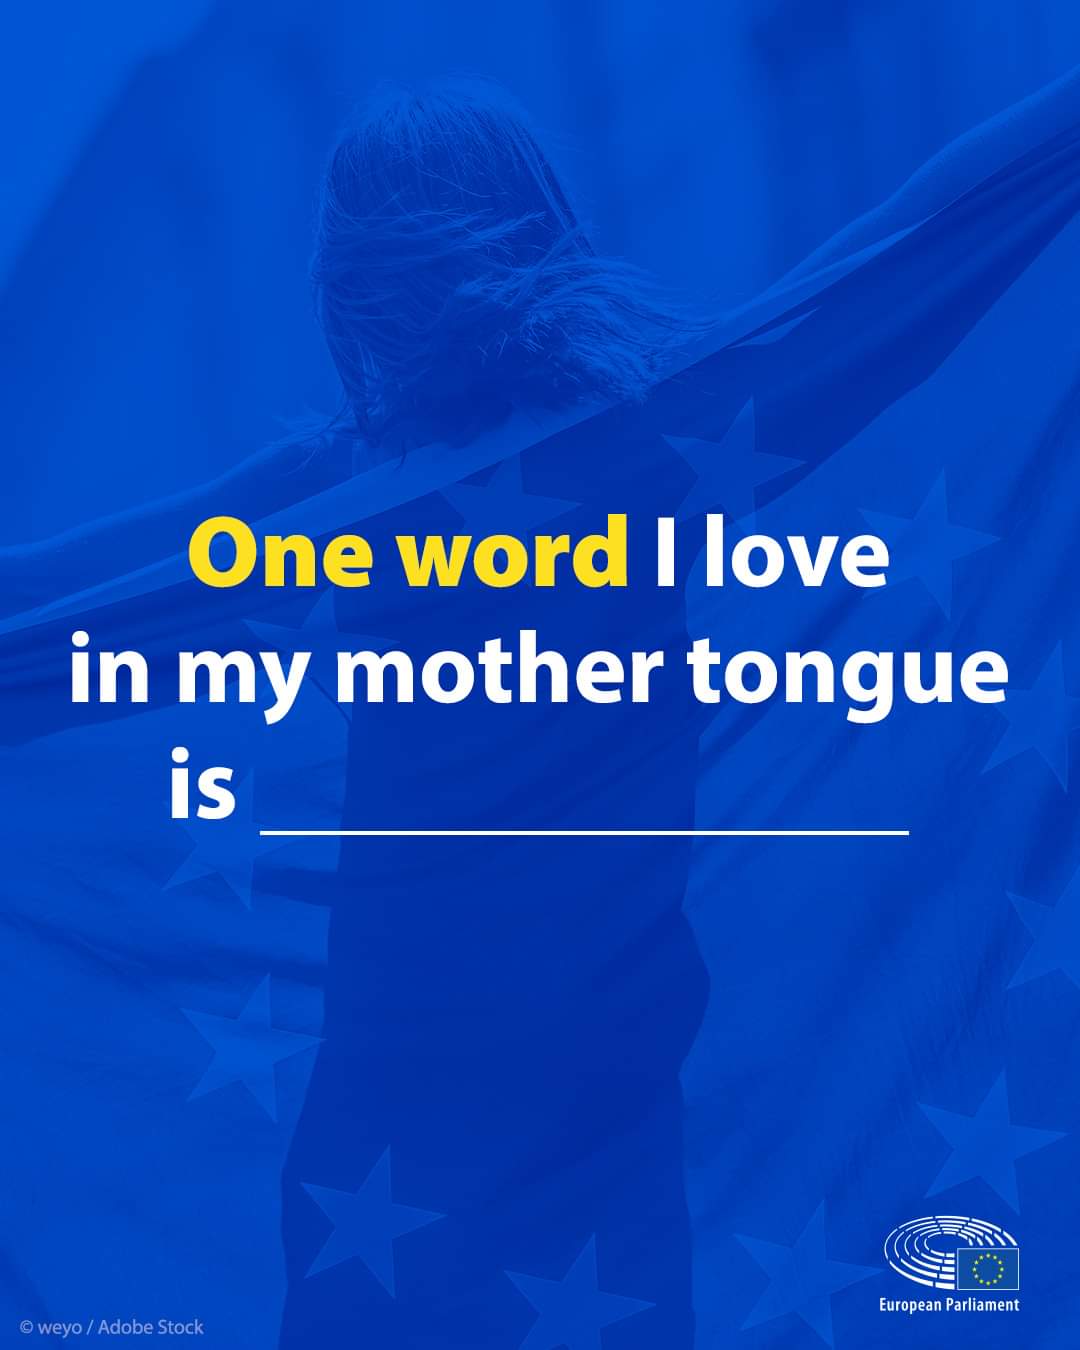 One word I love in my mother tongue is...